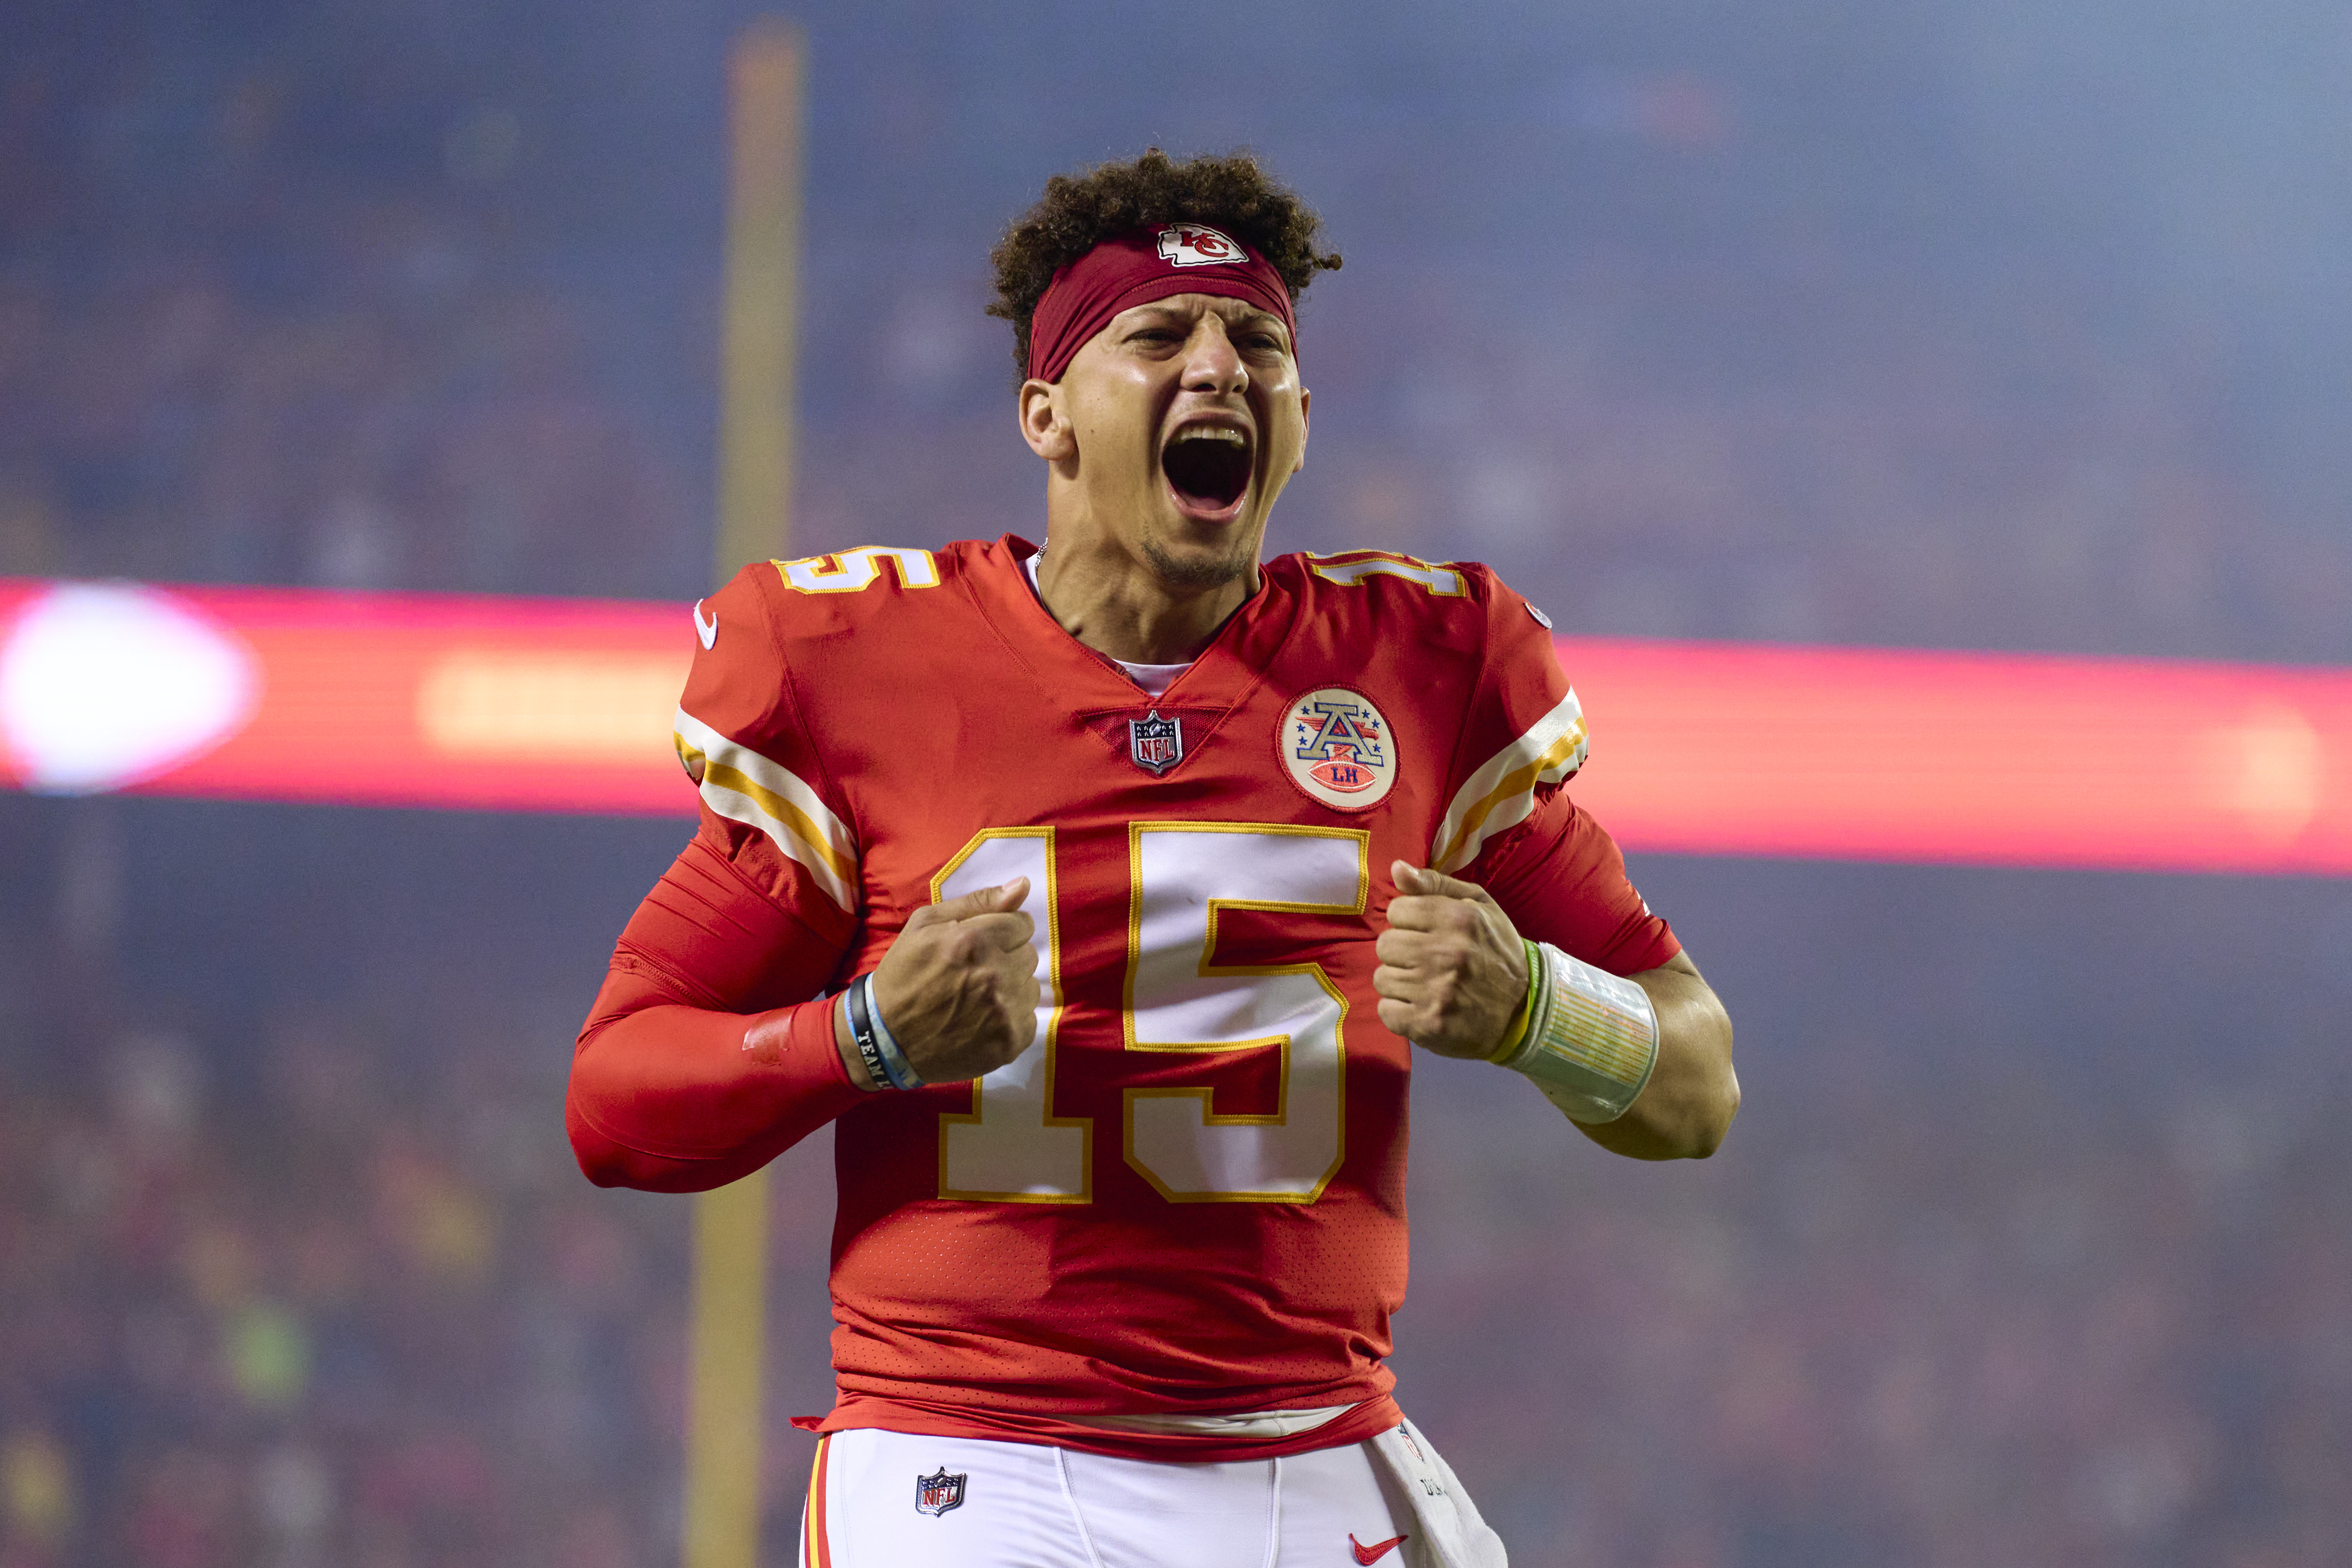 NFL on Oct. 10: Chiefs overcome 17-point deficit to beat Raiders